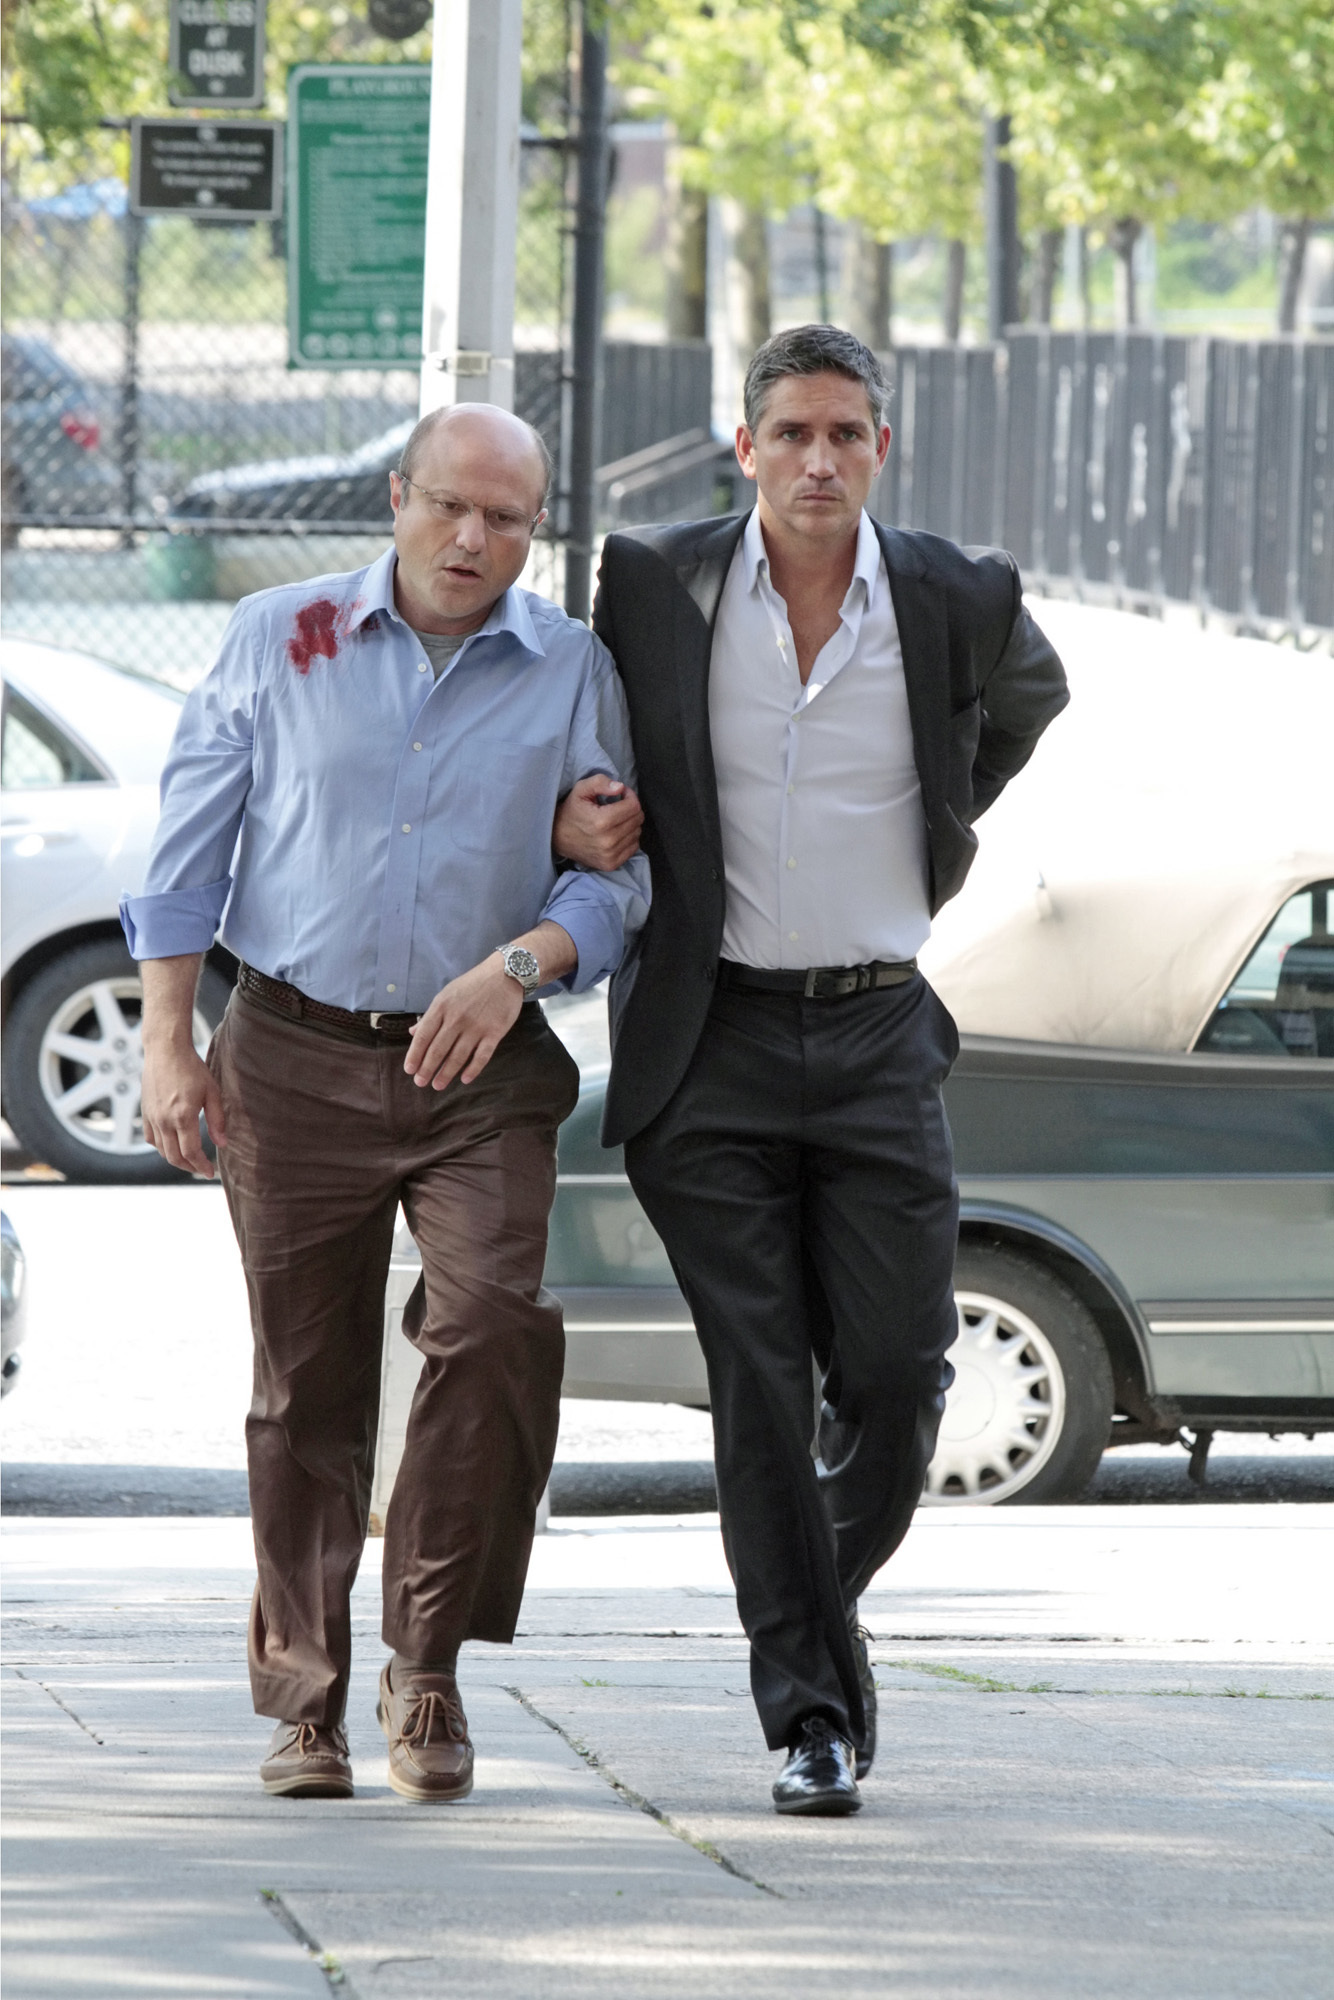 Still of Jim Caviezel and Enrico Colantoni in Person of Interest (2011)